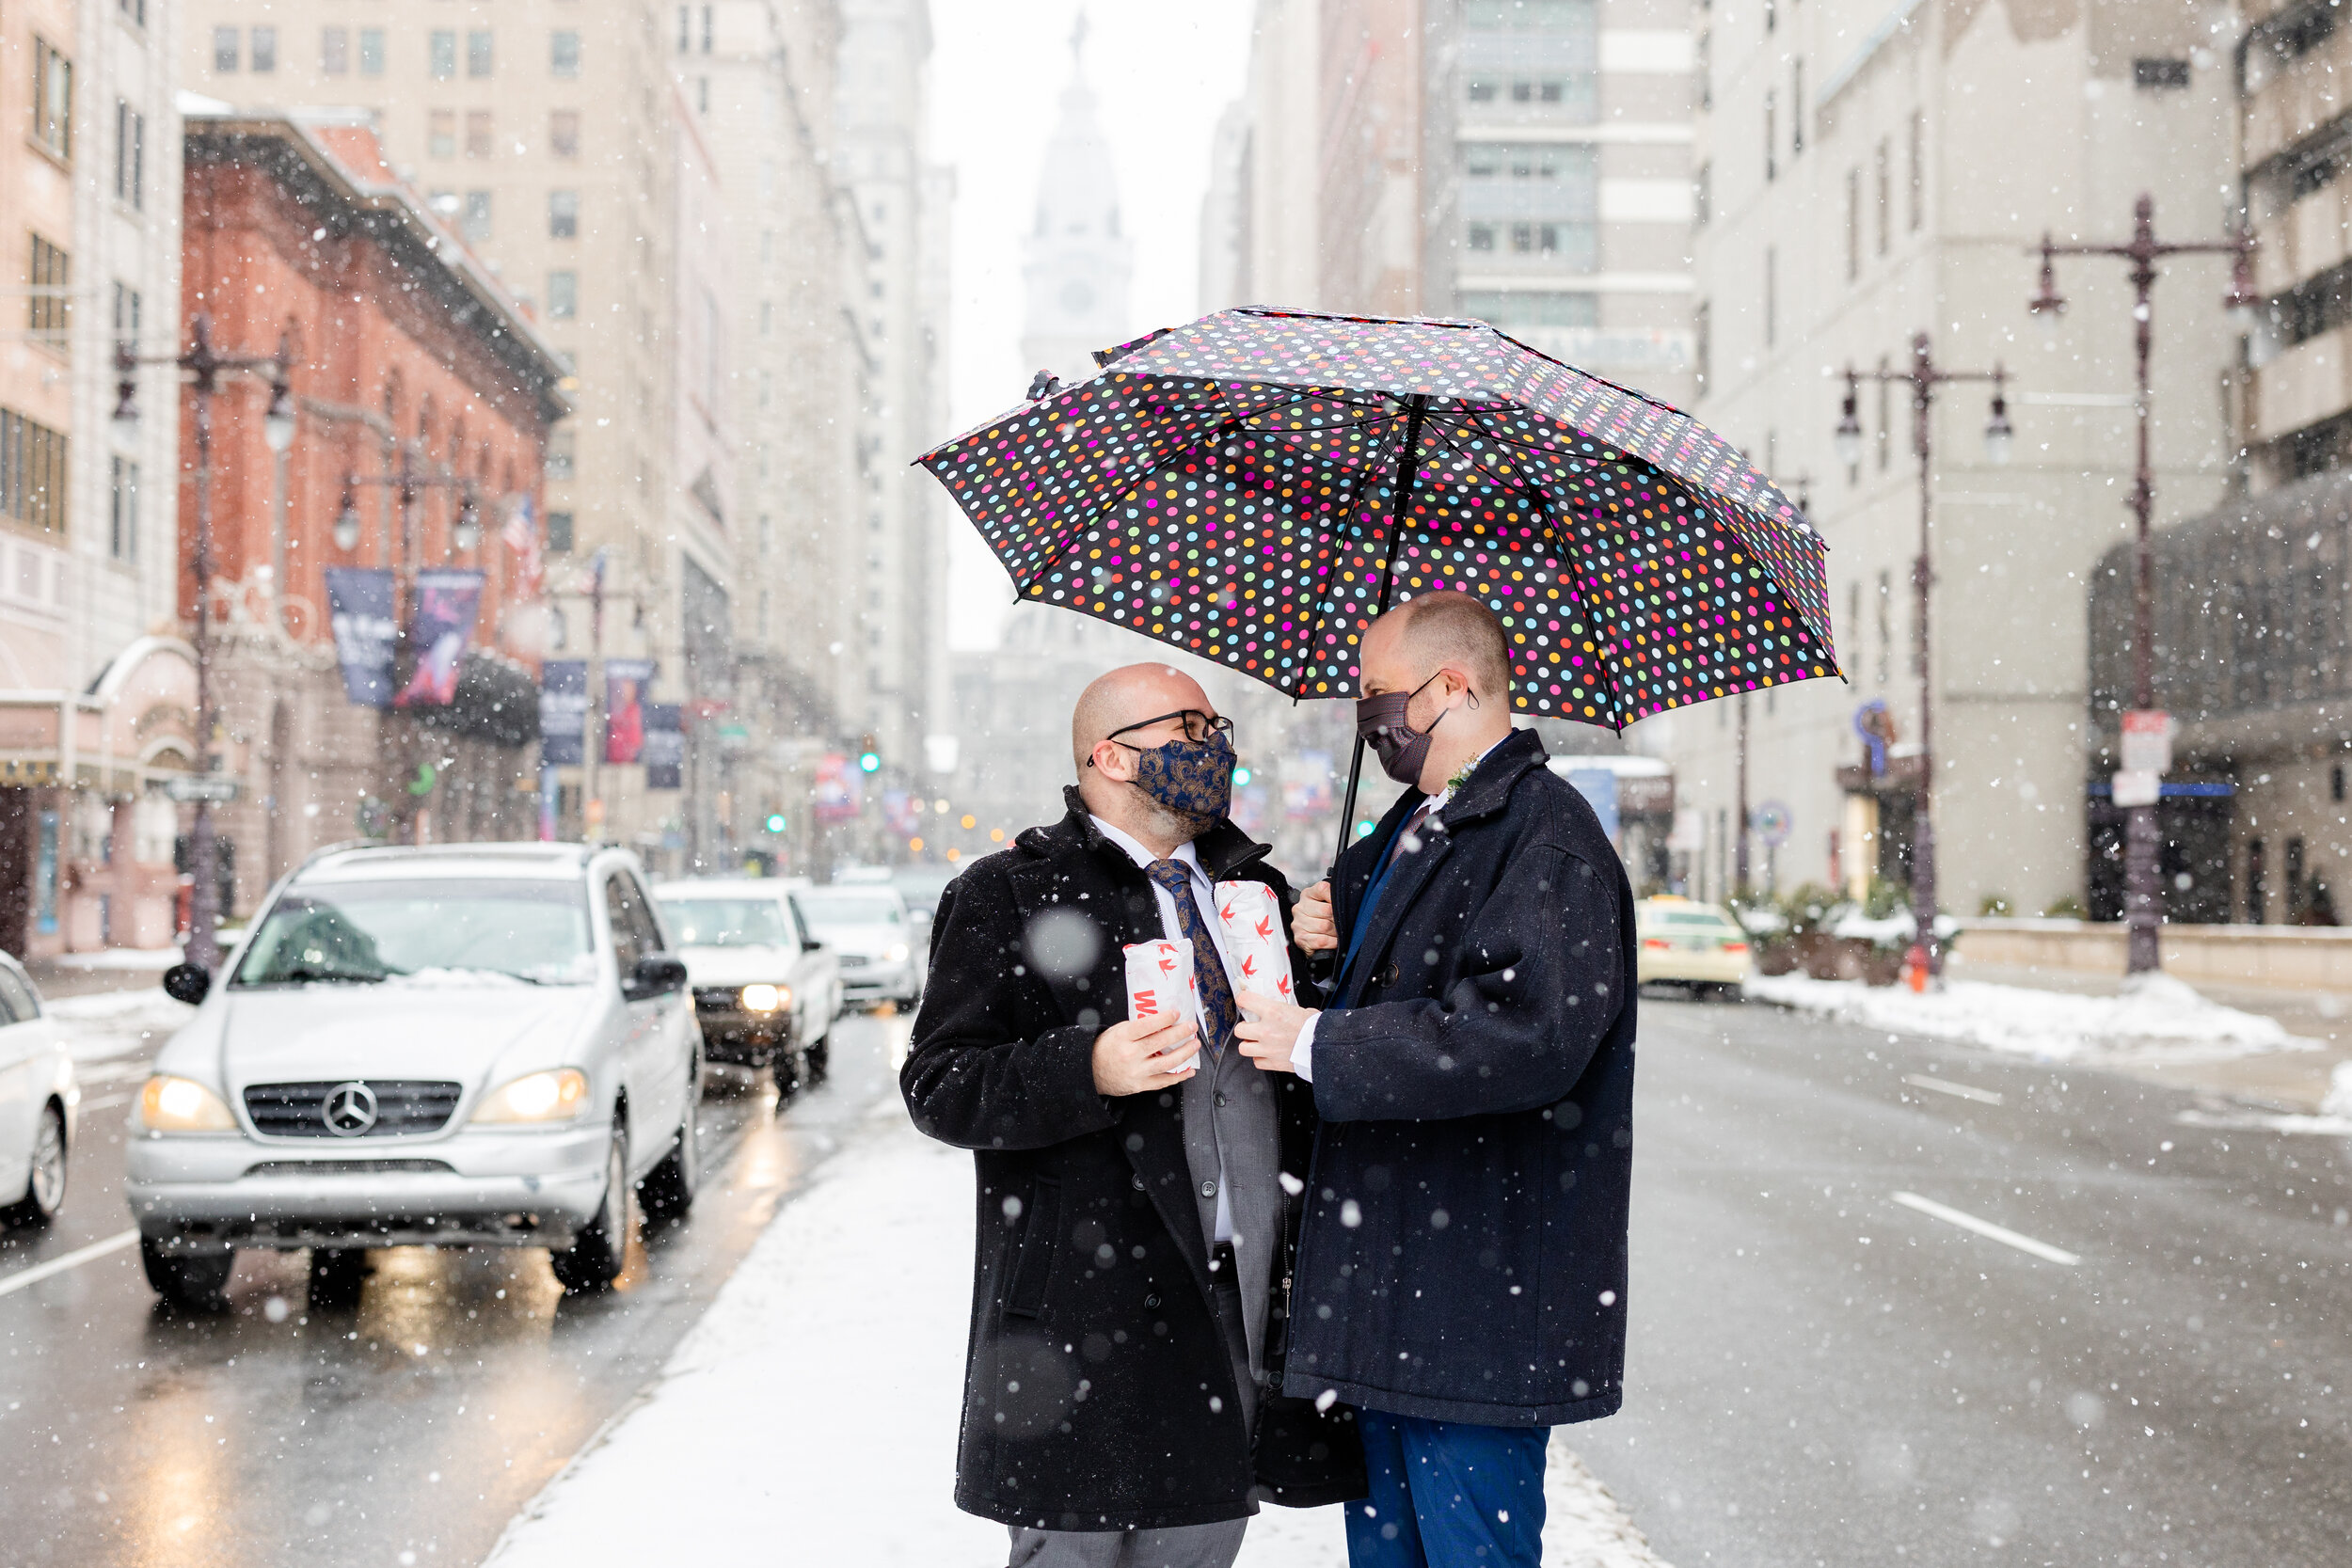 Curtis-and-Bill-Snowy-Vaux-Philly-Elopement-1.jpg